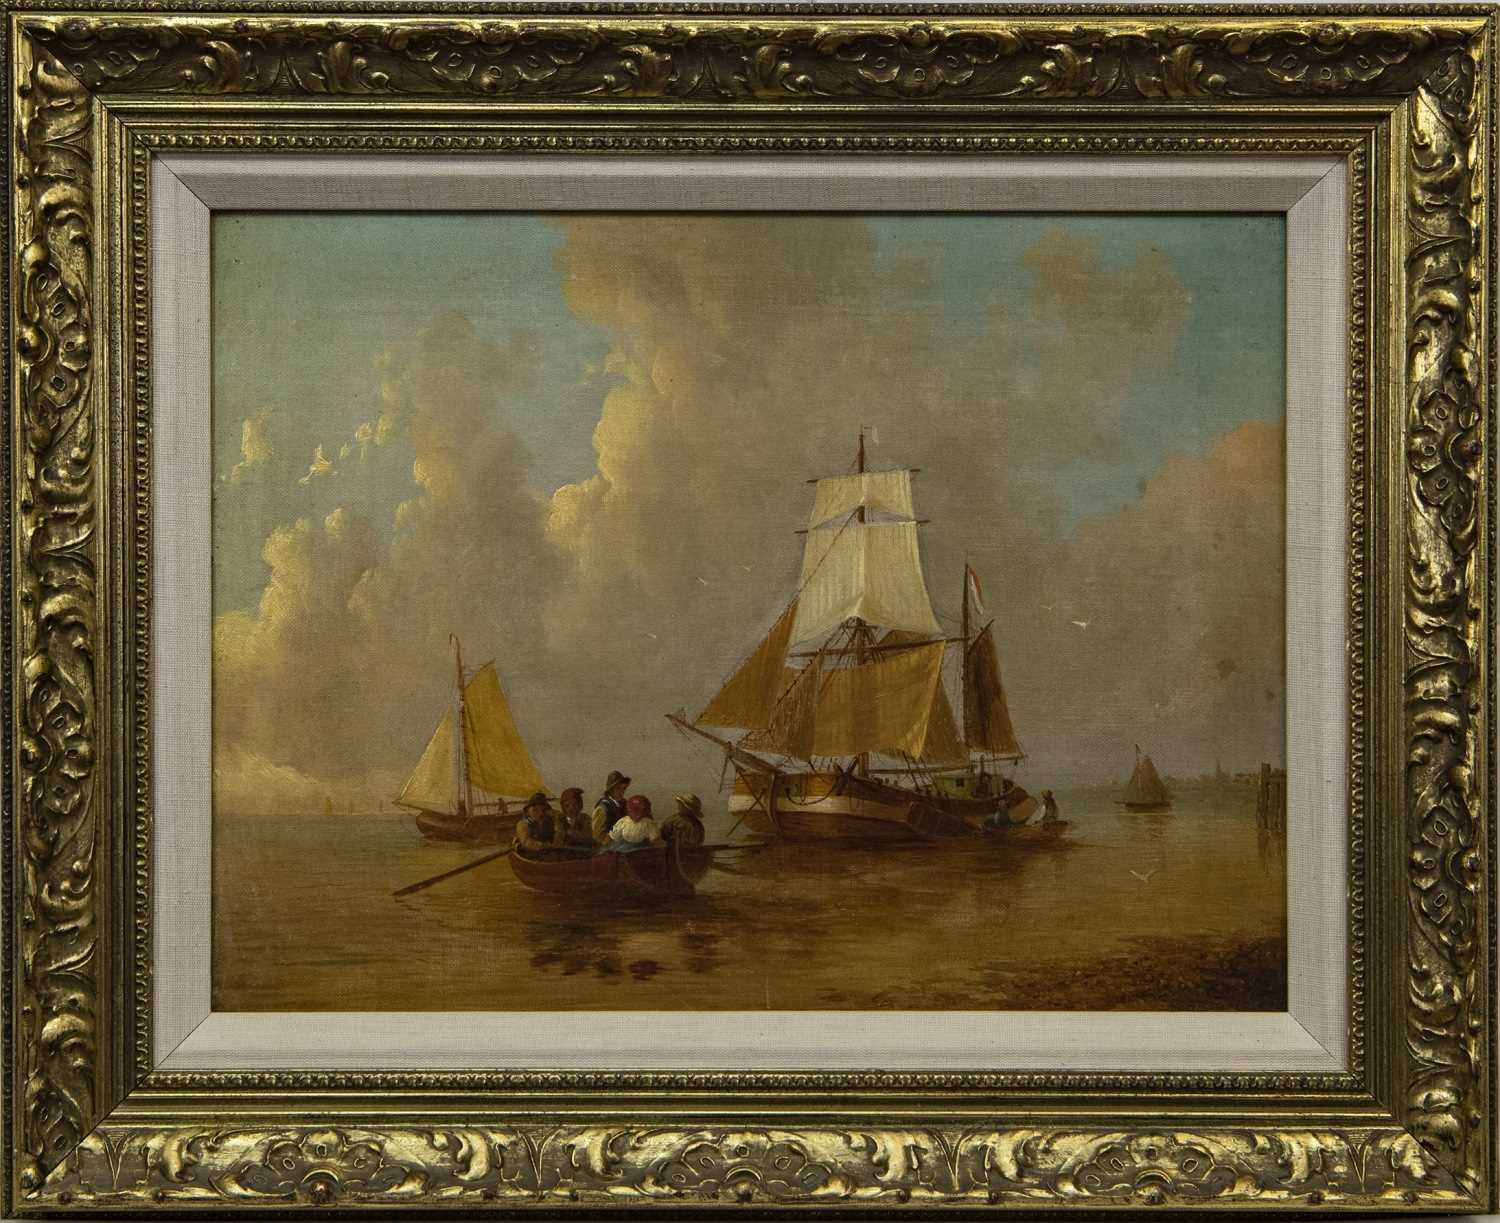 Lot 19 - BOATS IN CALM WATERS, A 20TH CENTURY DUTCH OIL